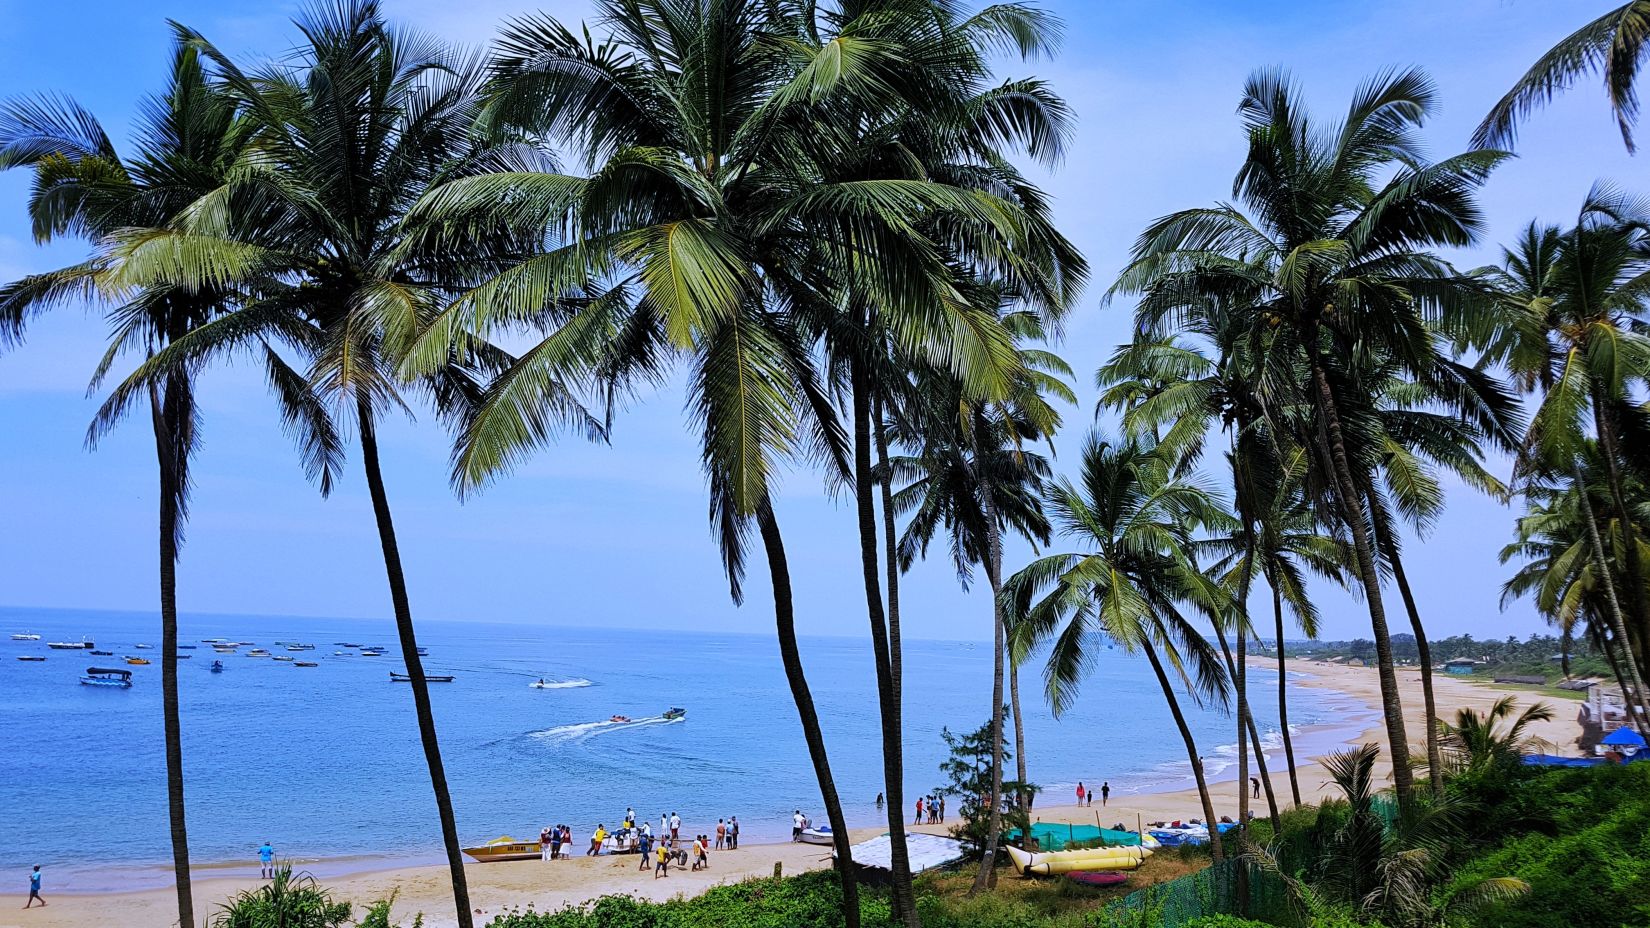 Caravela Beach Resort - view of a beach with coconut trees outlining it